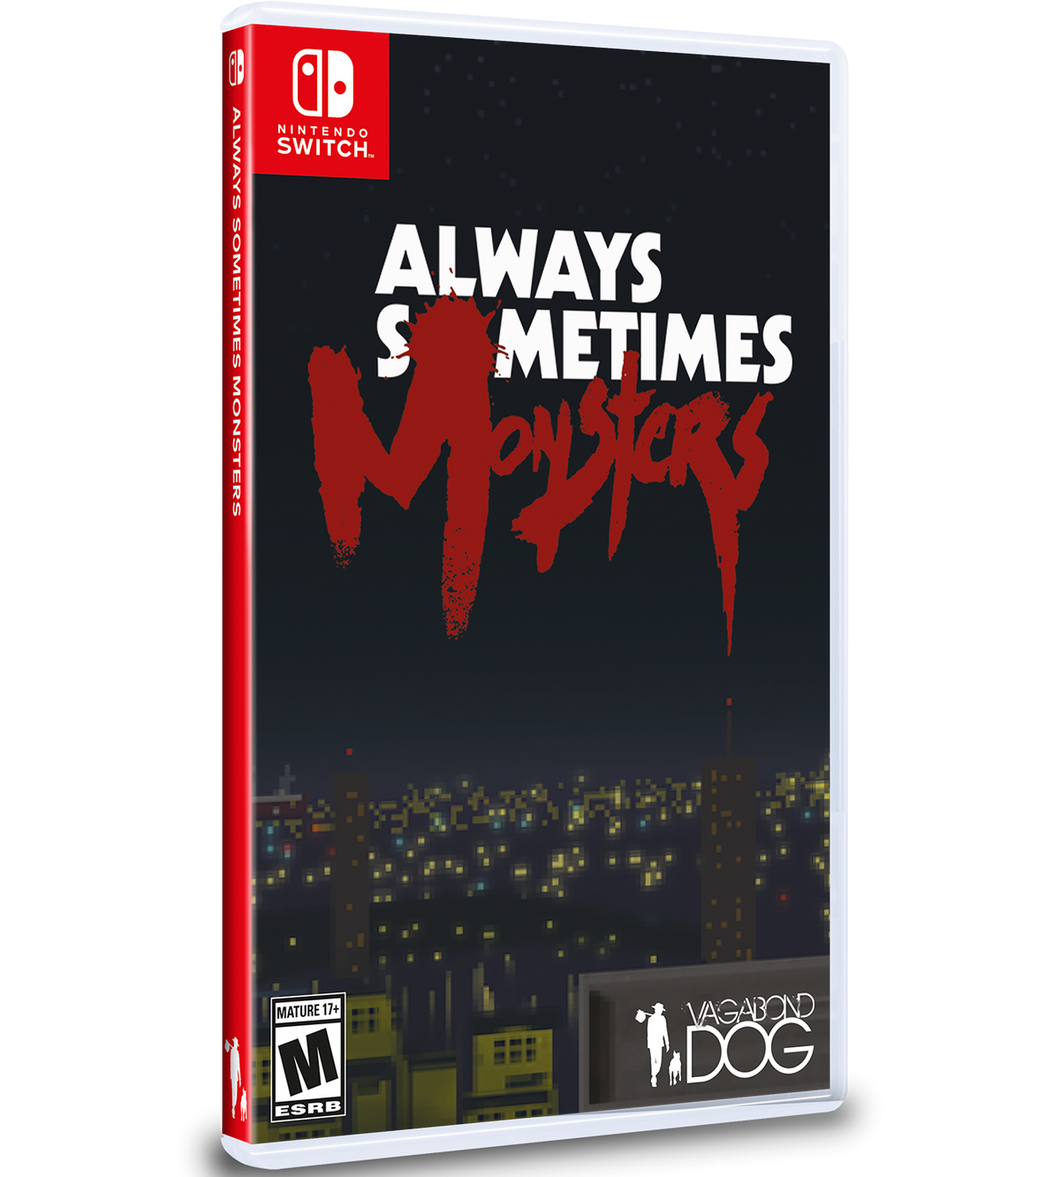 Always sometimes monsters / Limited run games / Switch